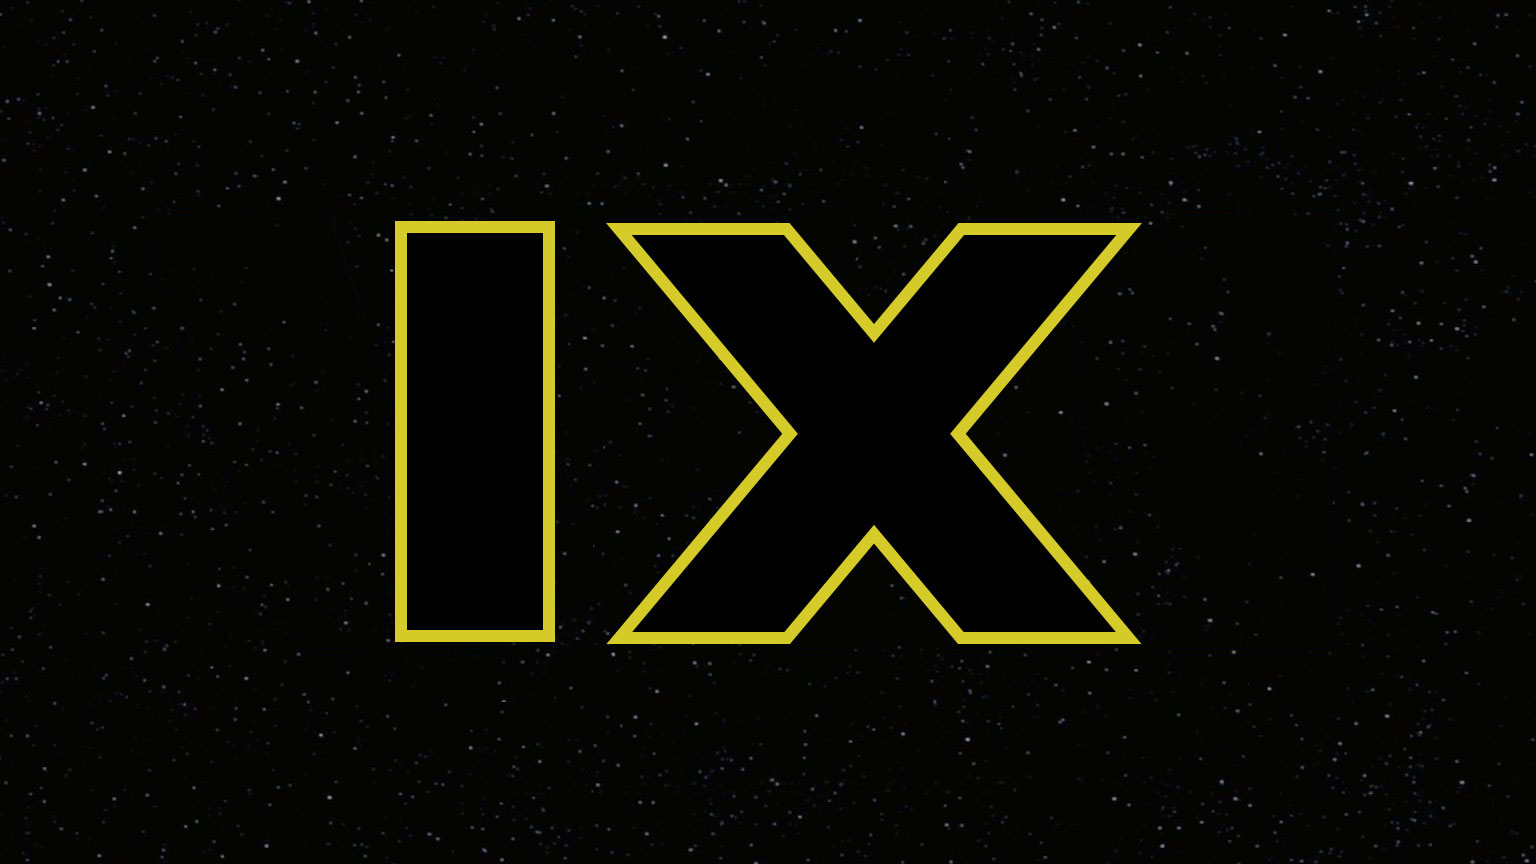 "Star Wars Episode IX," "Frozen 2," "The Lion King" and More Get Release Dates, "Gigantic" Pushed Way Back